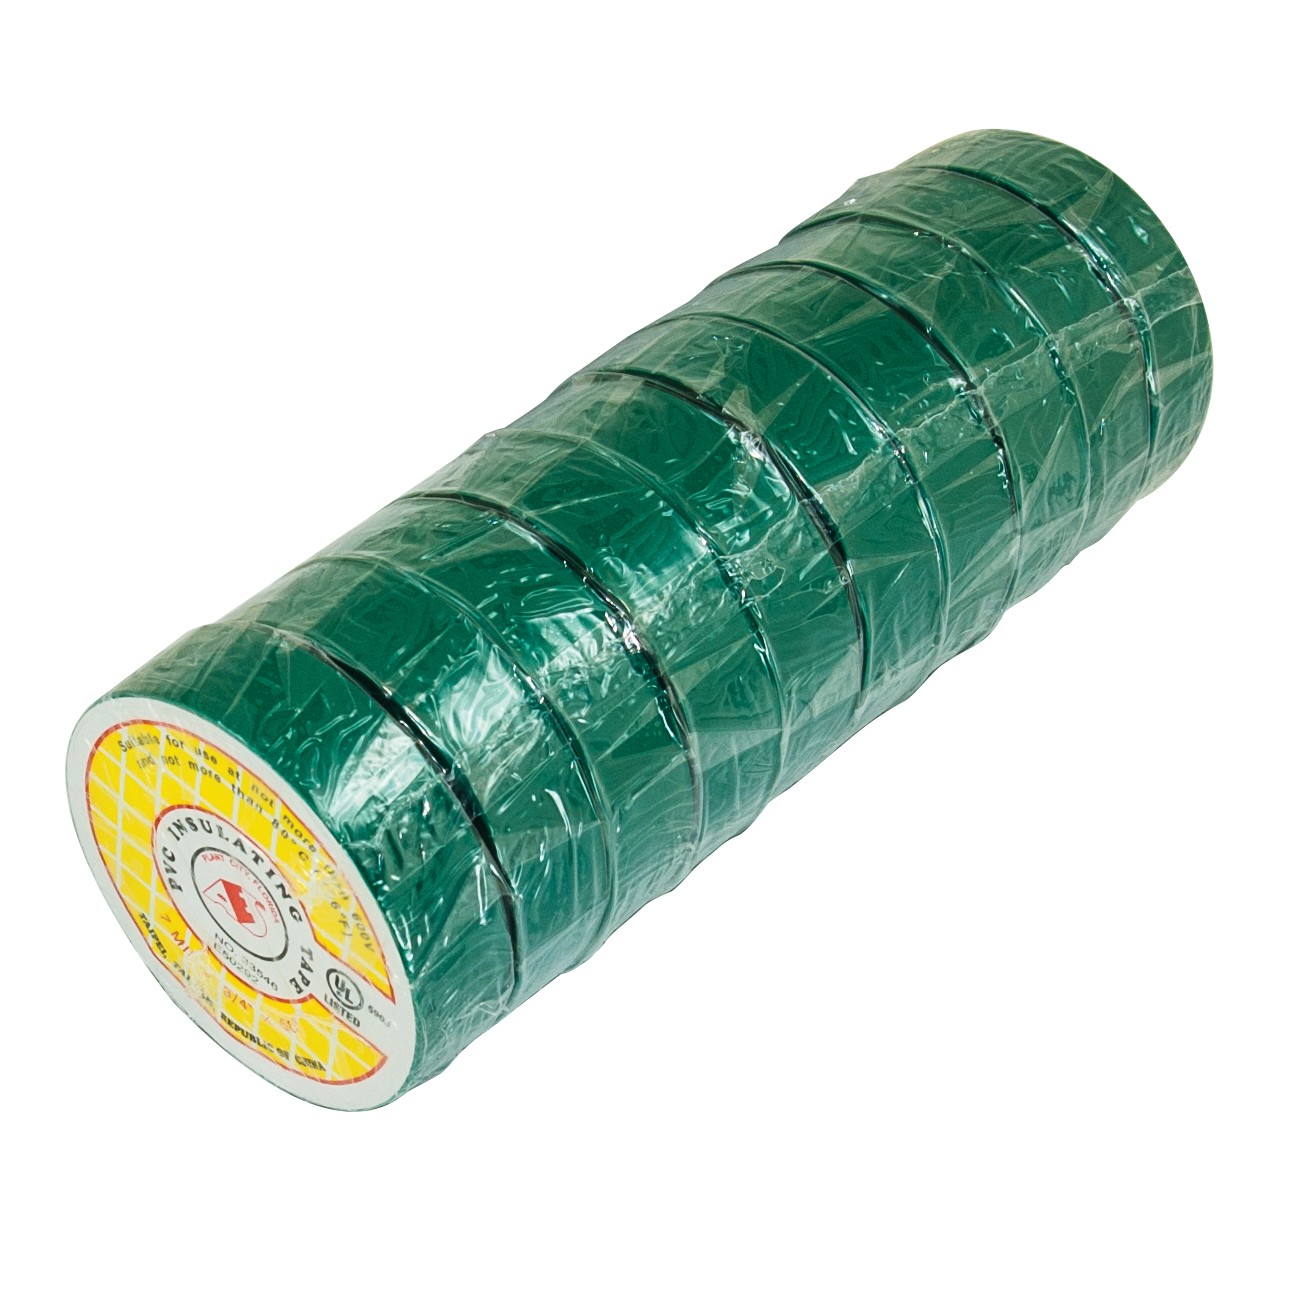 50ft x 3/4" Electrical Tape - Green (10 Rolls) 